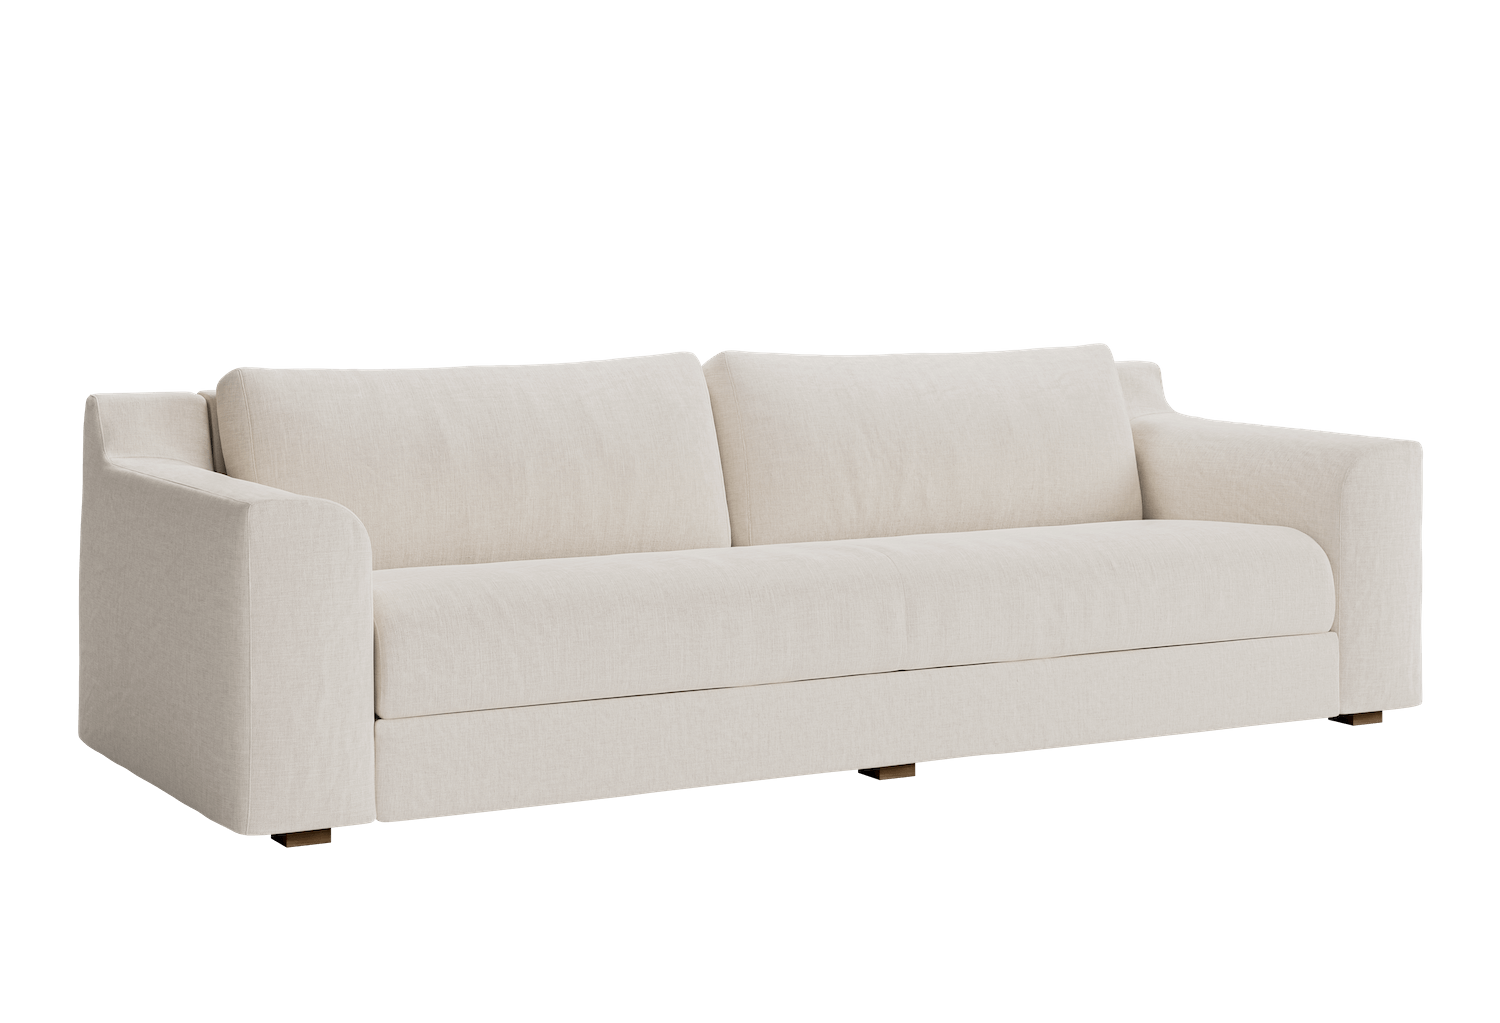 The Elevate Sofa in Upcycled Poly